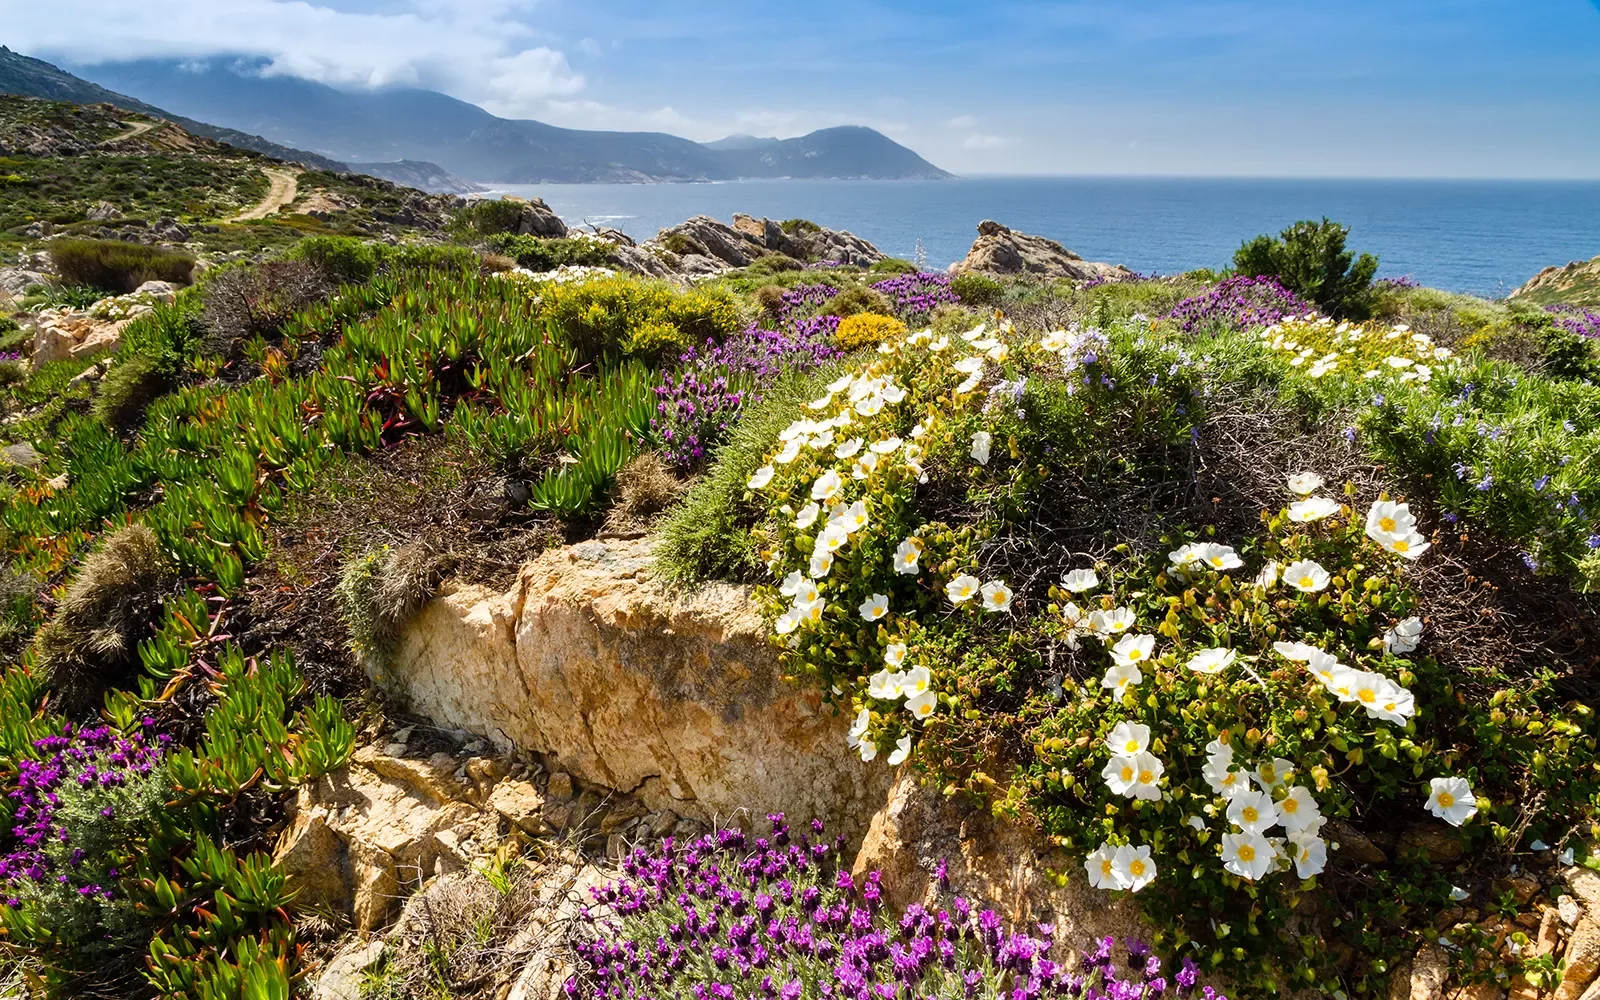 Close-up shot of white and purple flowers, ocean and cliffs in background.